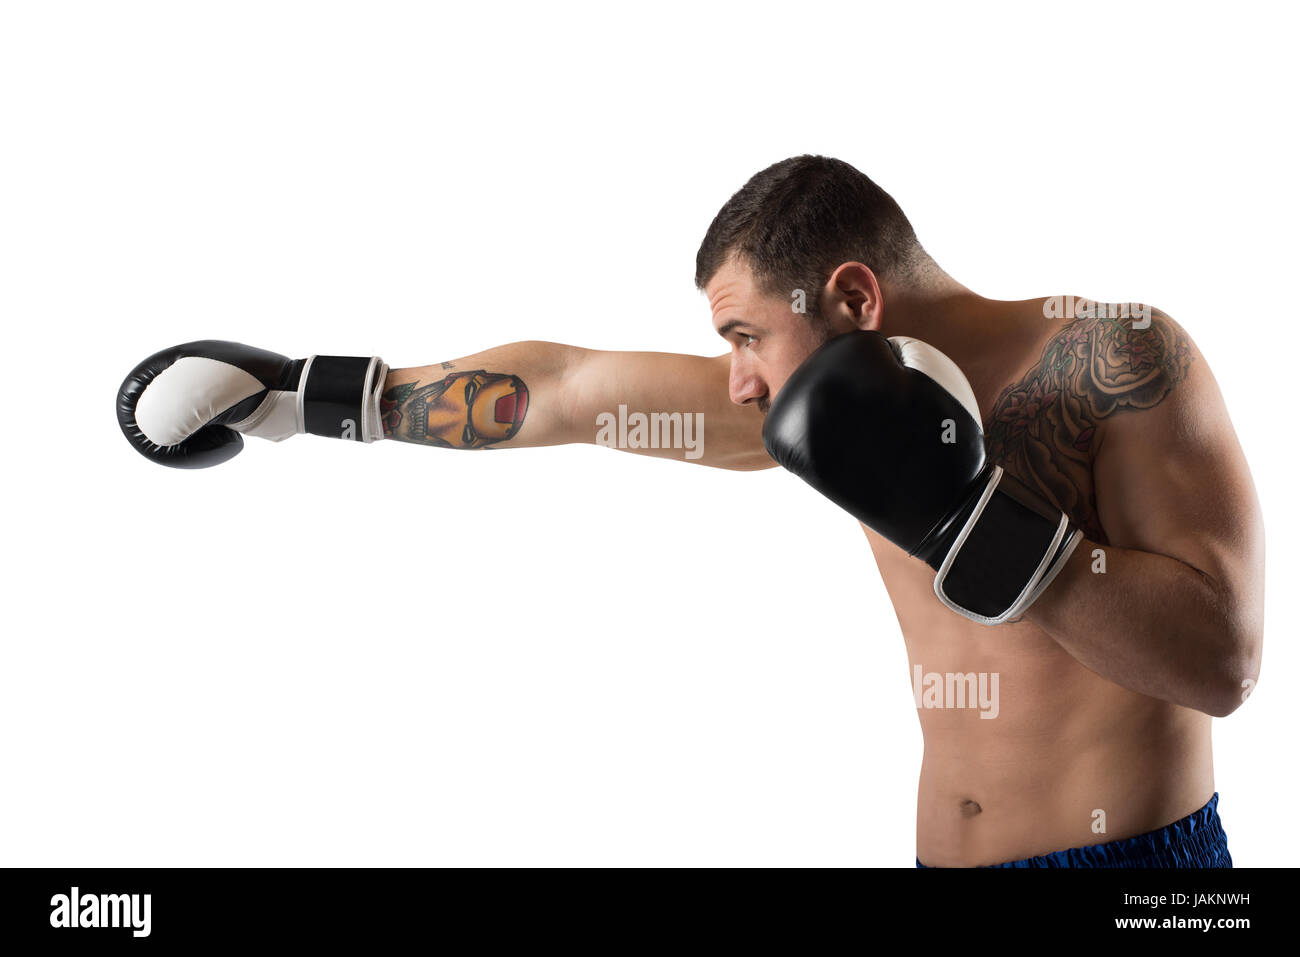 Confident boxer with fiery boxing gloves Stock Photo